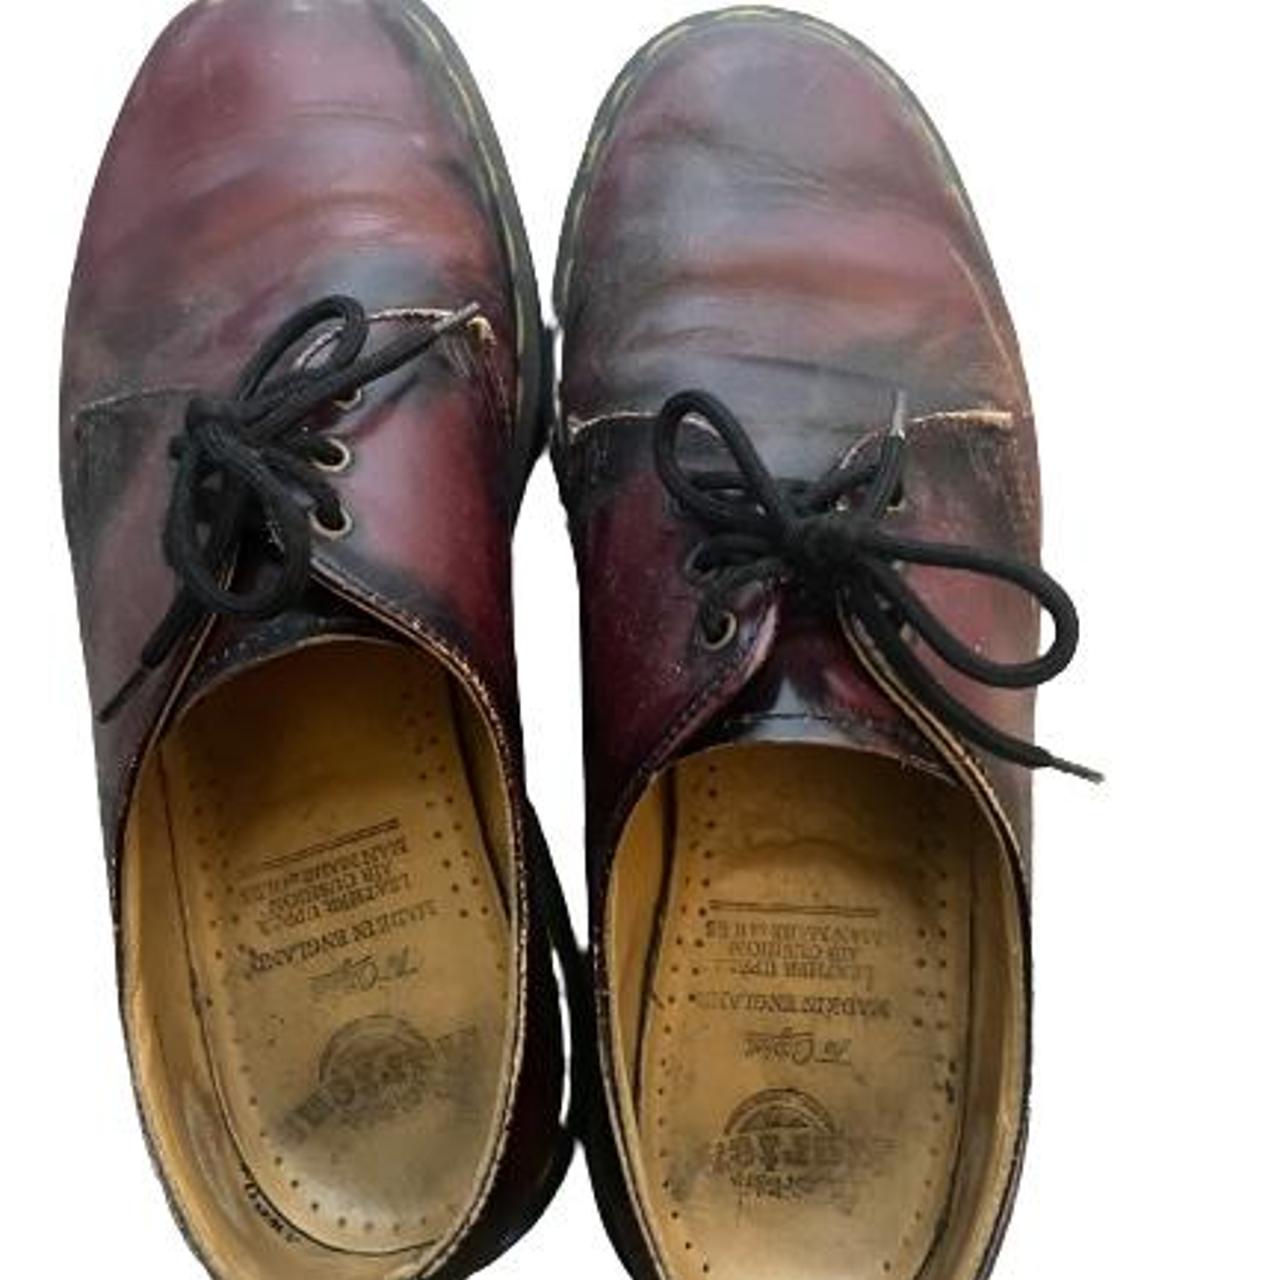 Dr. Martens Men's Burgundy and Black Trainers (3)